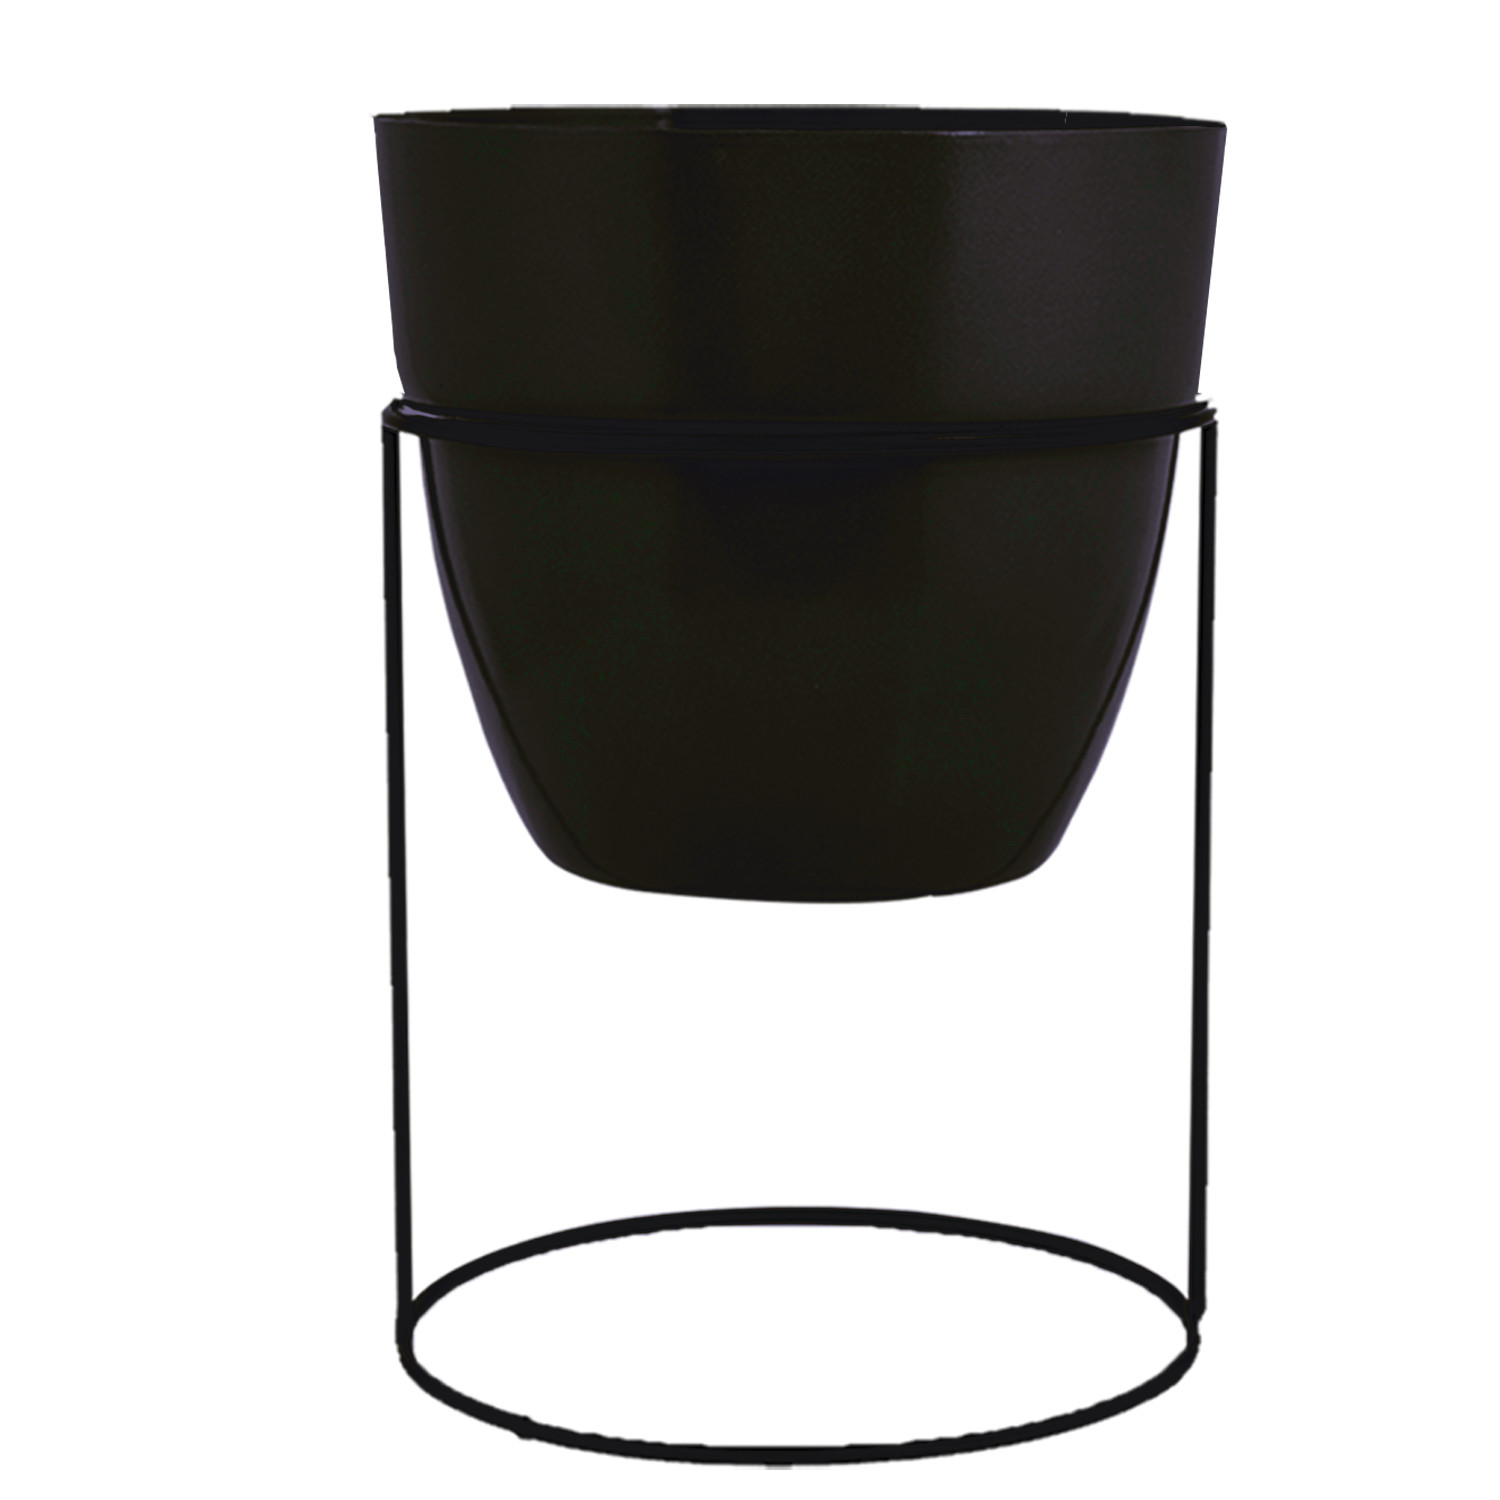 Kuber Industries Metal Planter|Decorative Modern Indoor Desk Pot|Iron Table Stand Flower Planter Pot For Home Décor,8.5 Inches,(Black)